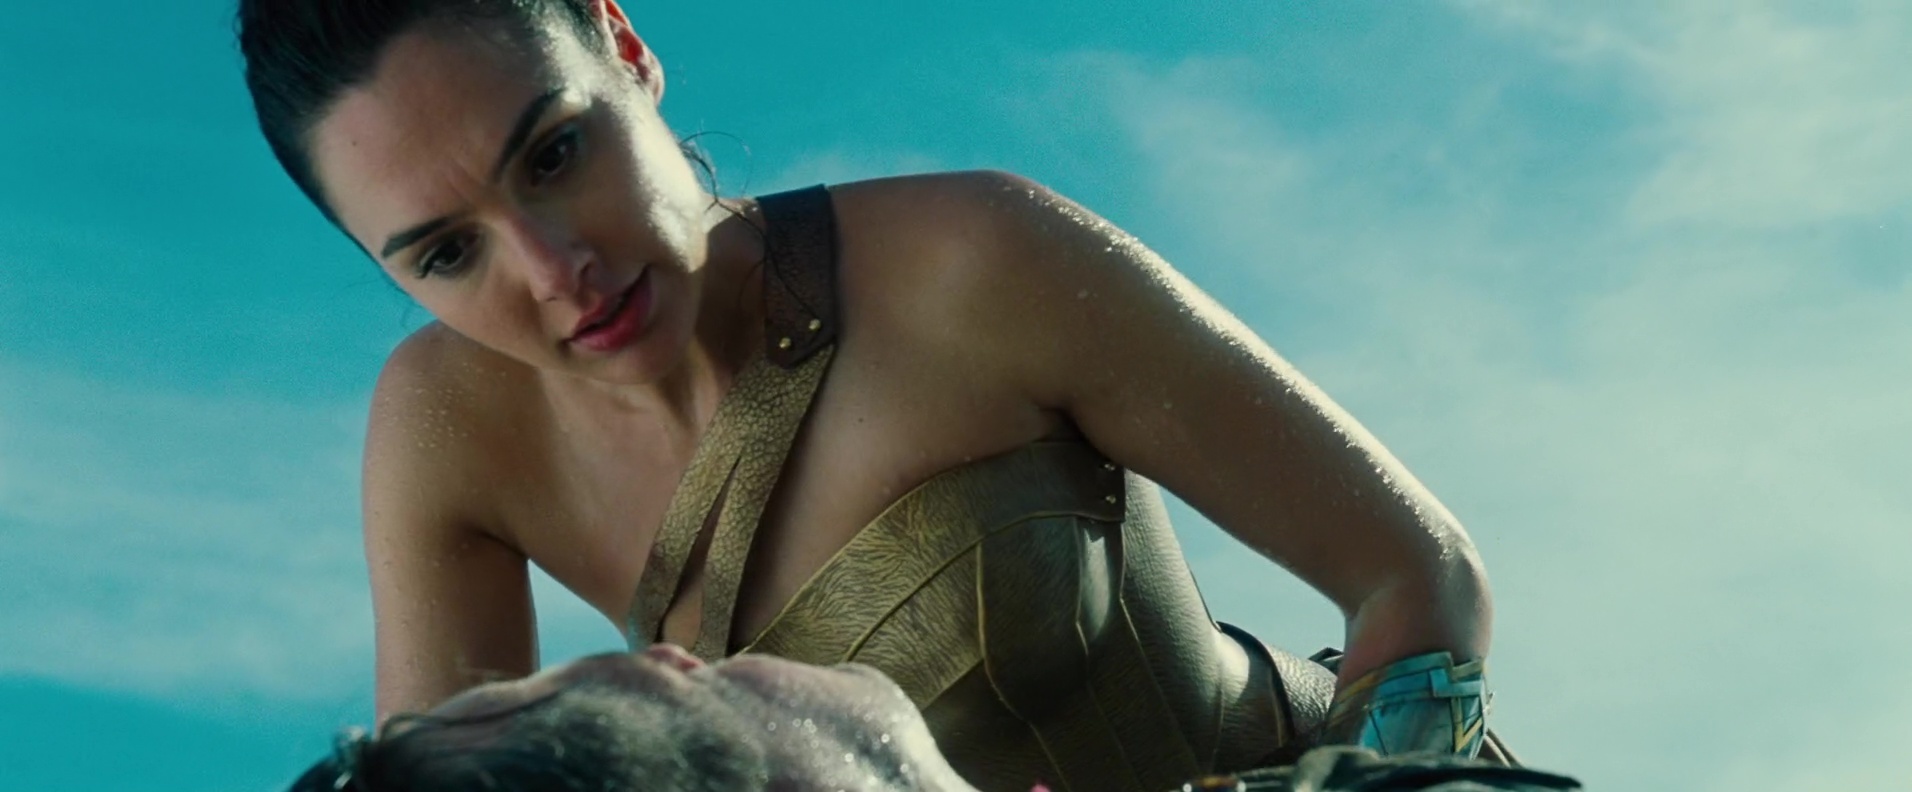 amit kushnir recommends wonder woman nude scenes pic